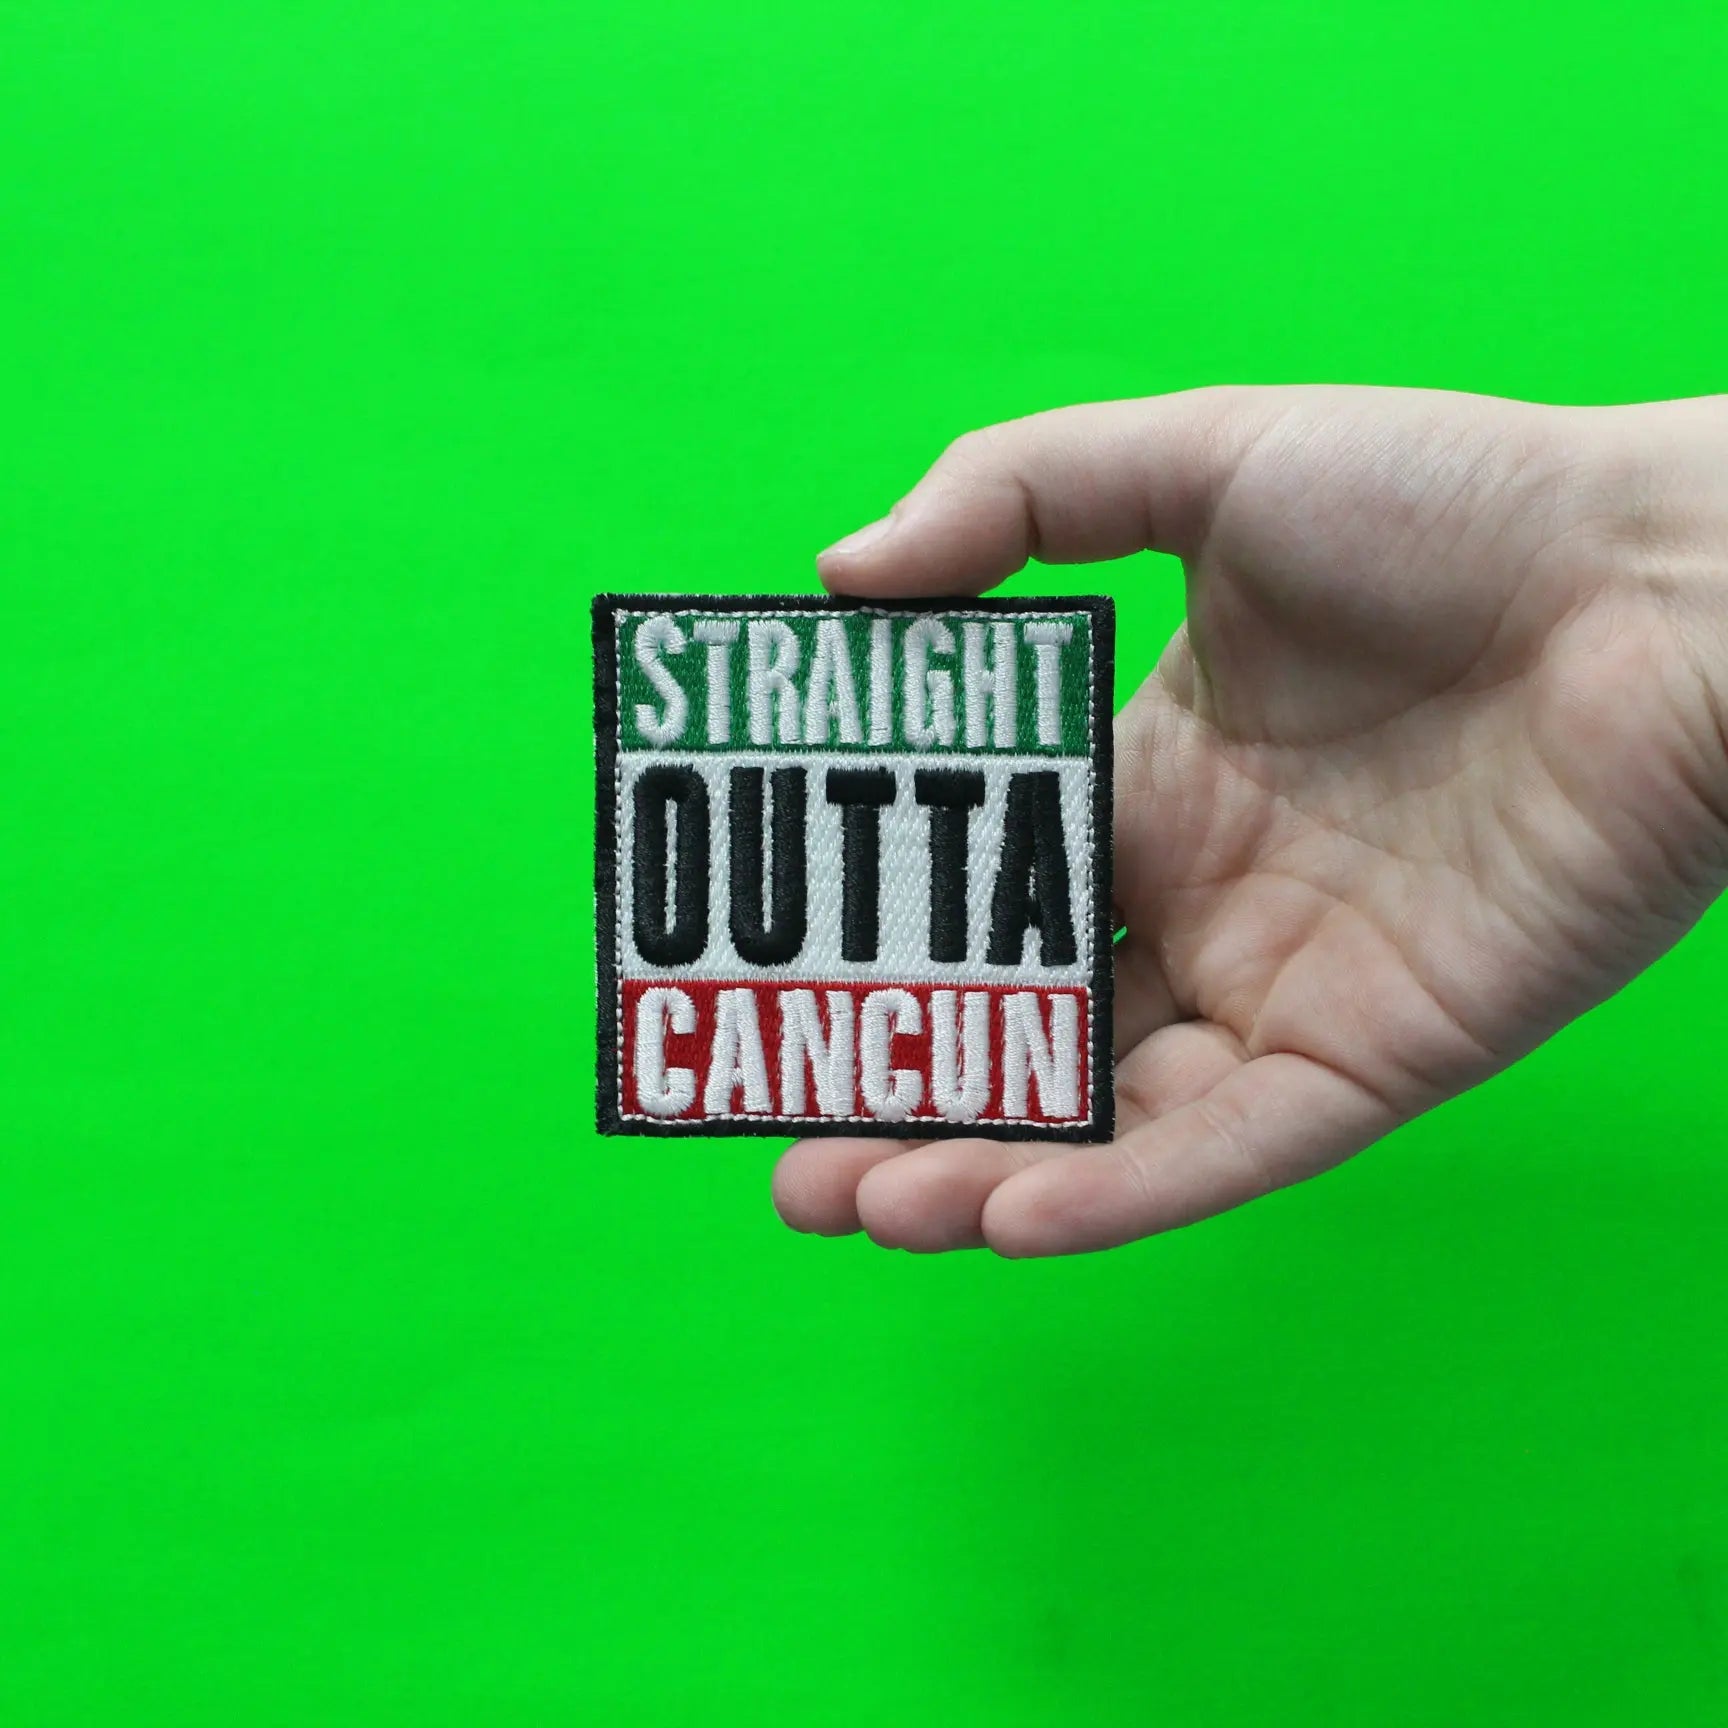 Straight Outta Cancun Embroidered Iron On Patch 